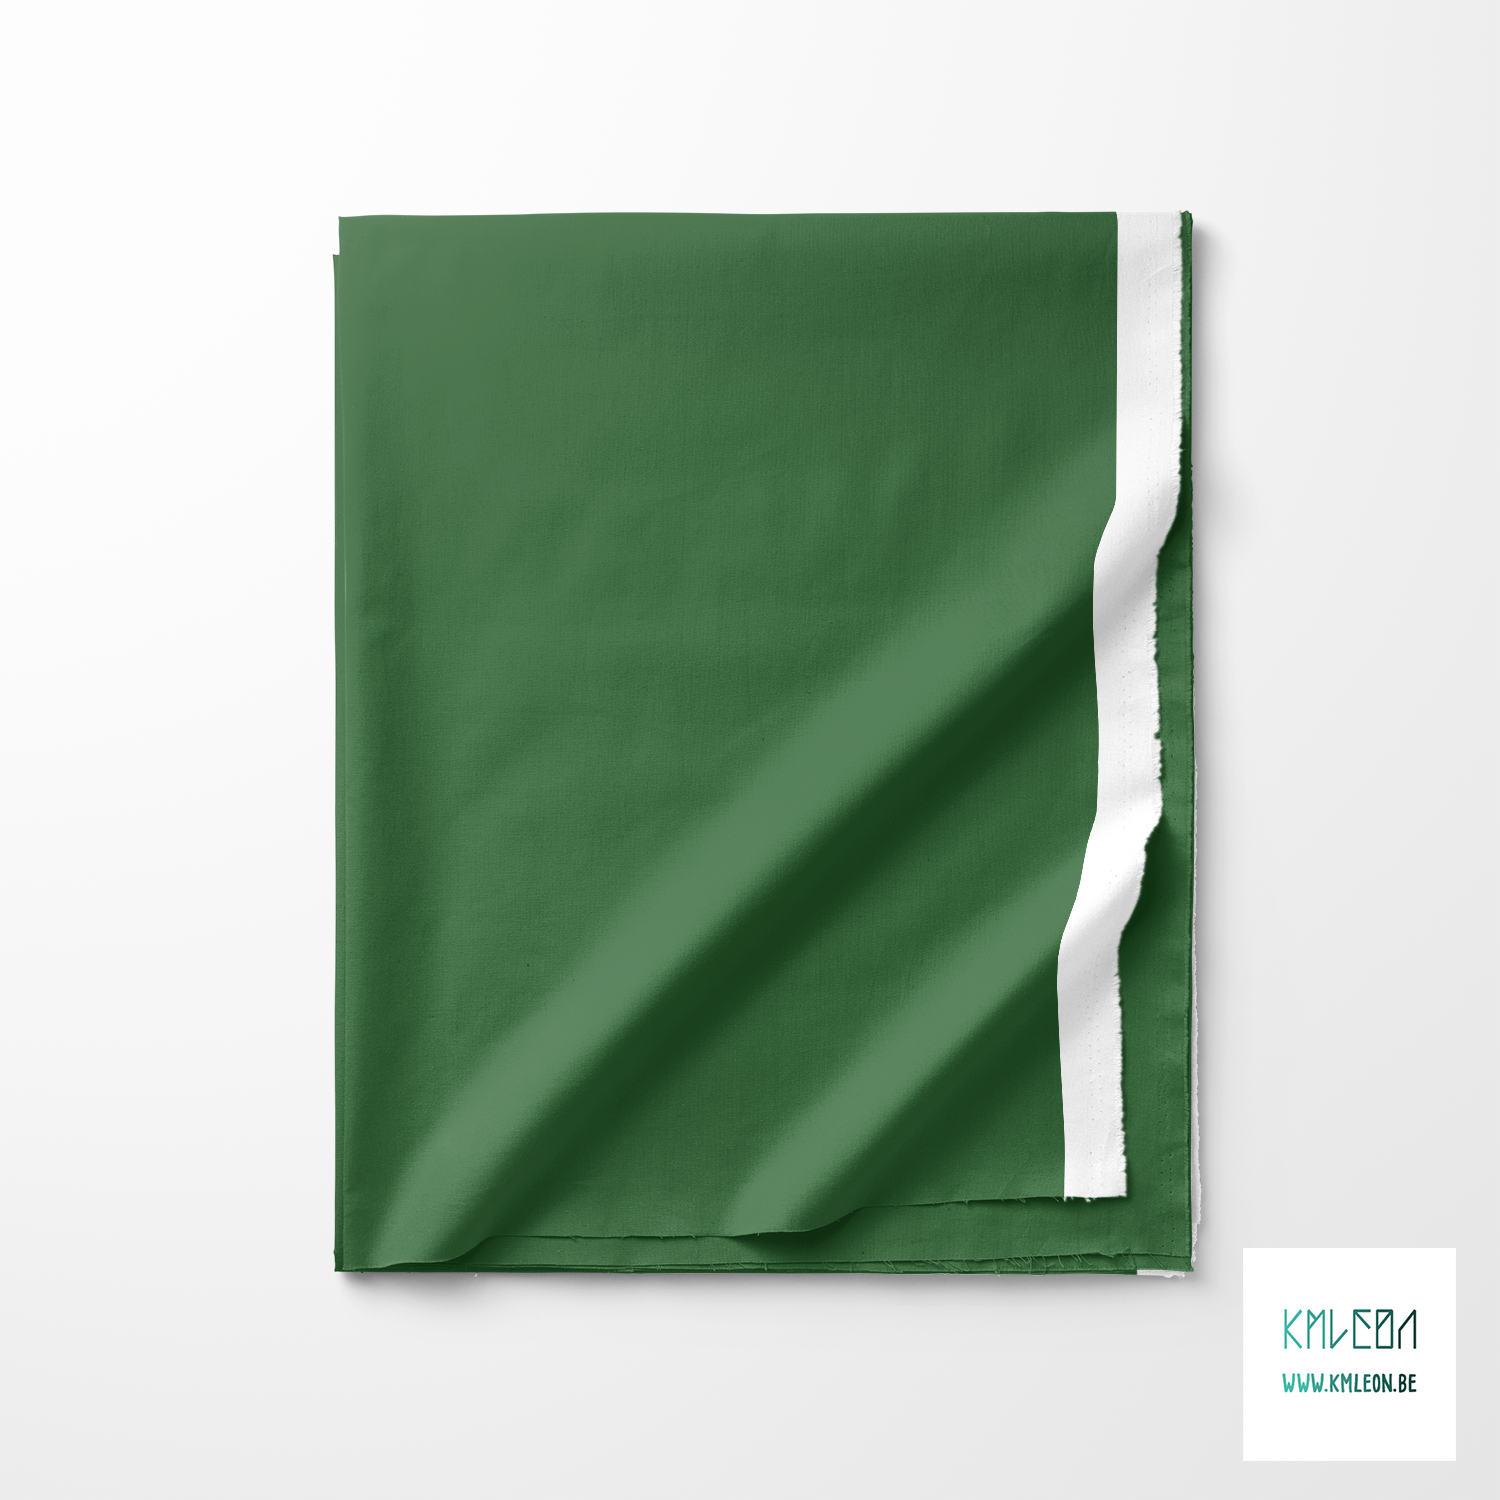 Solid forest green fabric